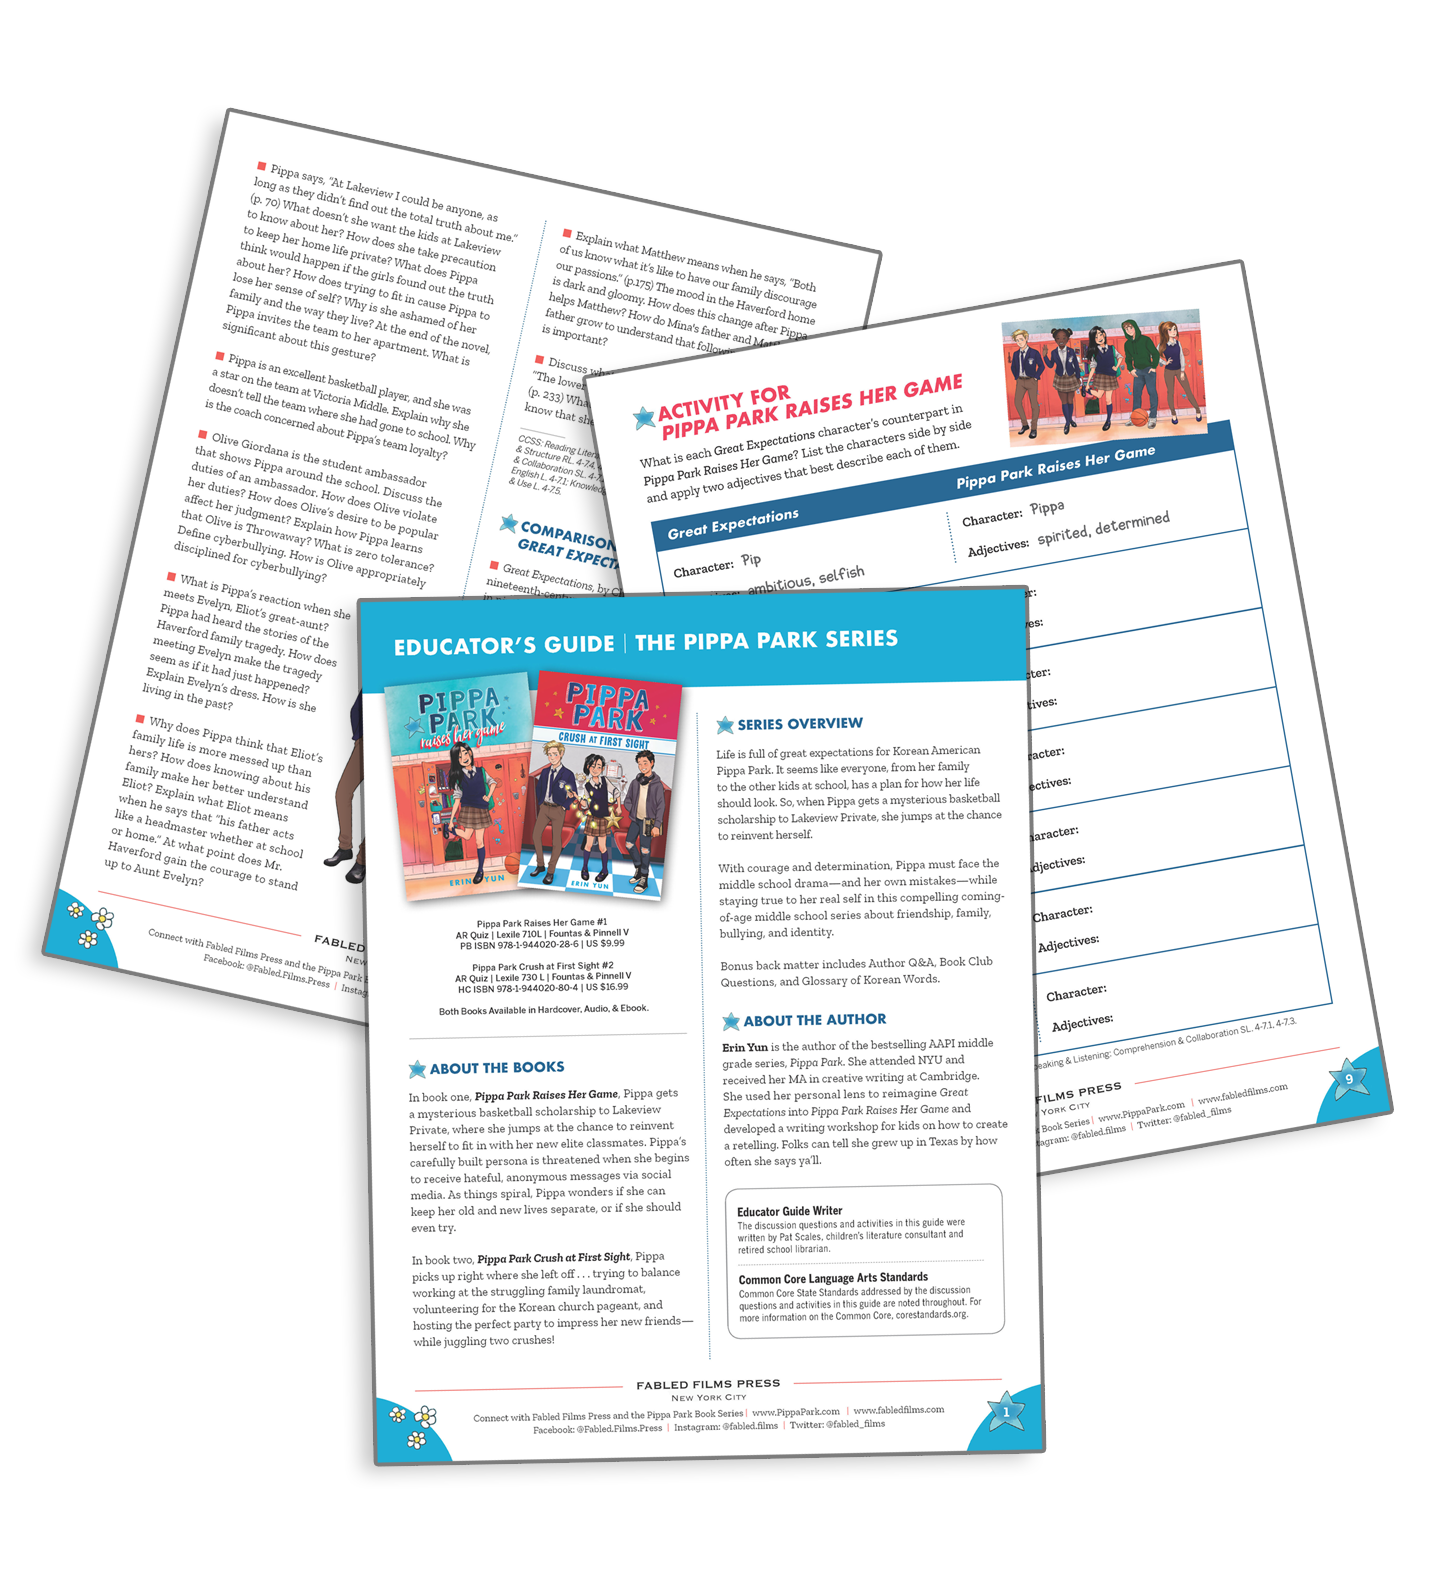 This image shows three pages of the Pippa Park Language Arts Guide for both books that contain lessons and activities that are aligned to the Common Core Standards. 